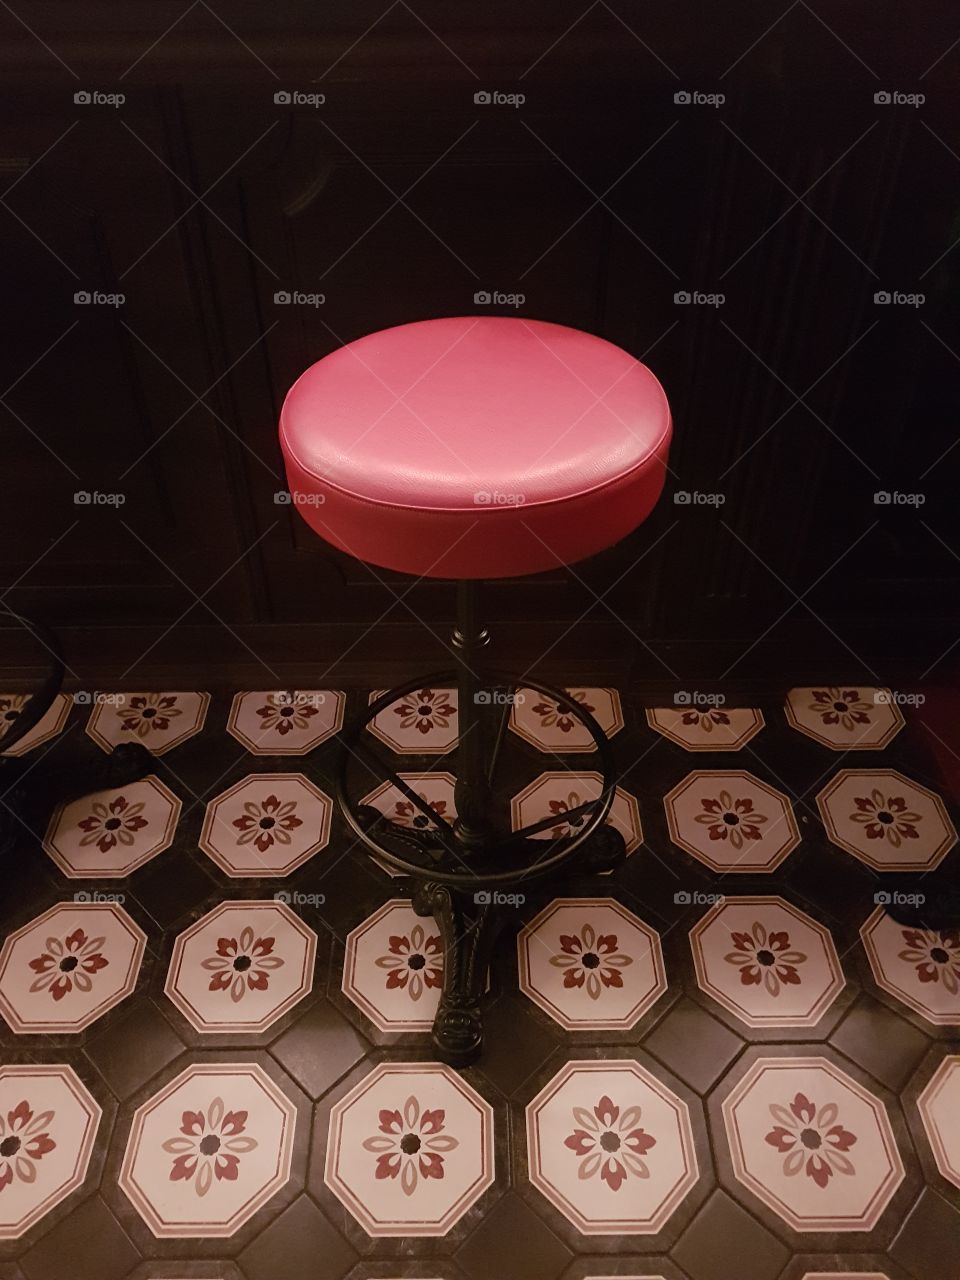 Red stool in a restaurant with decorated tiles floor in black, white and red